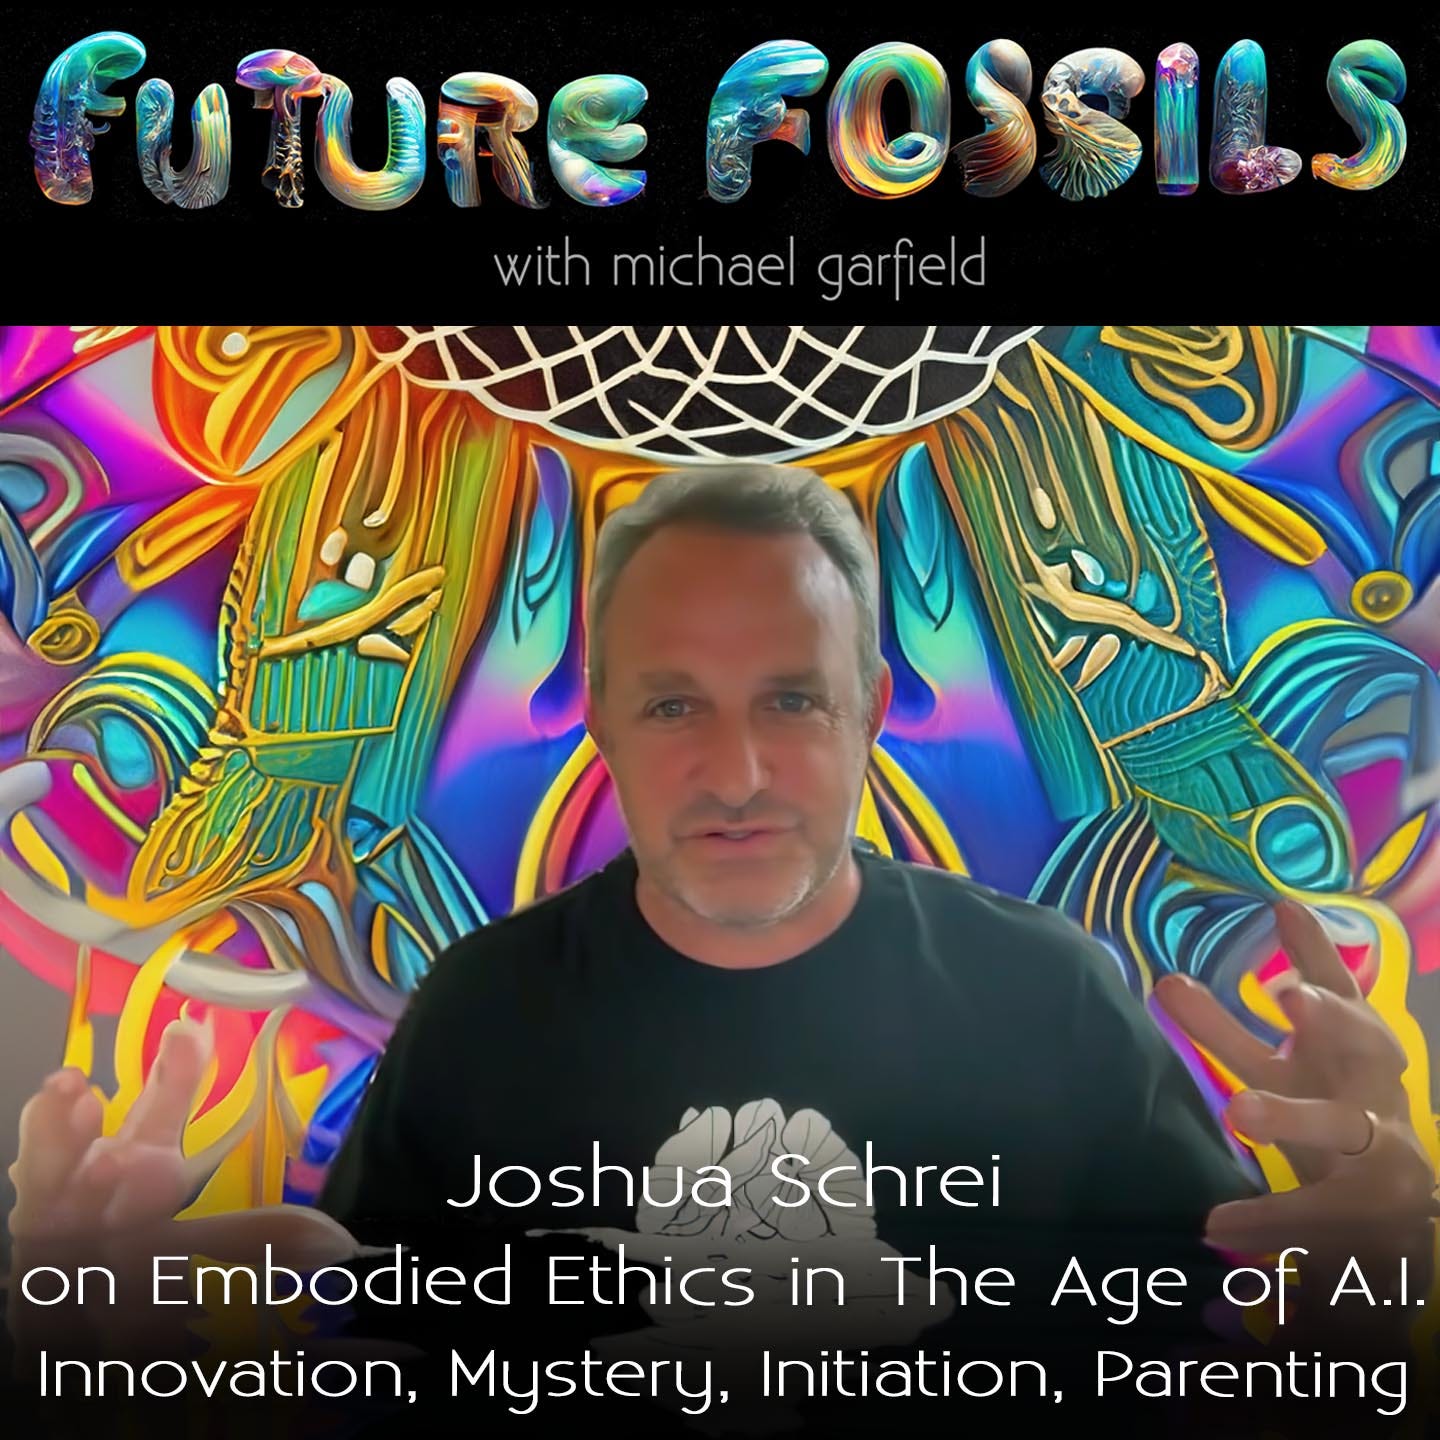 🙏🏽⛩🤖 219 - Joshua Schrei on Embodied Ethics in The Age of A.I.